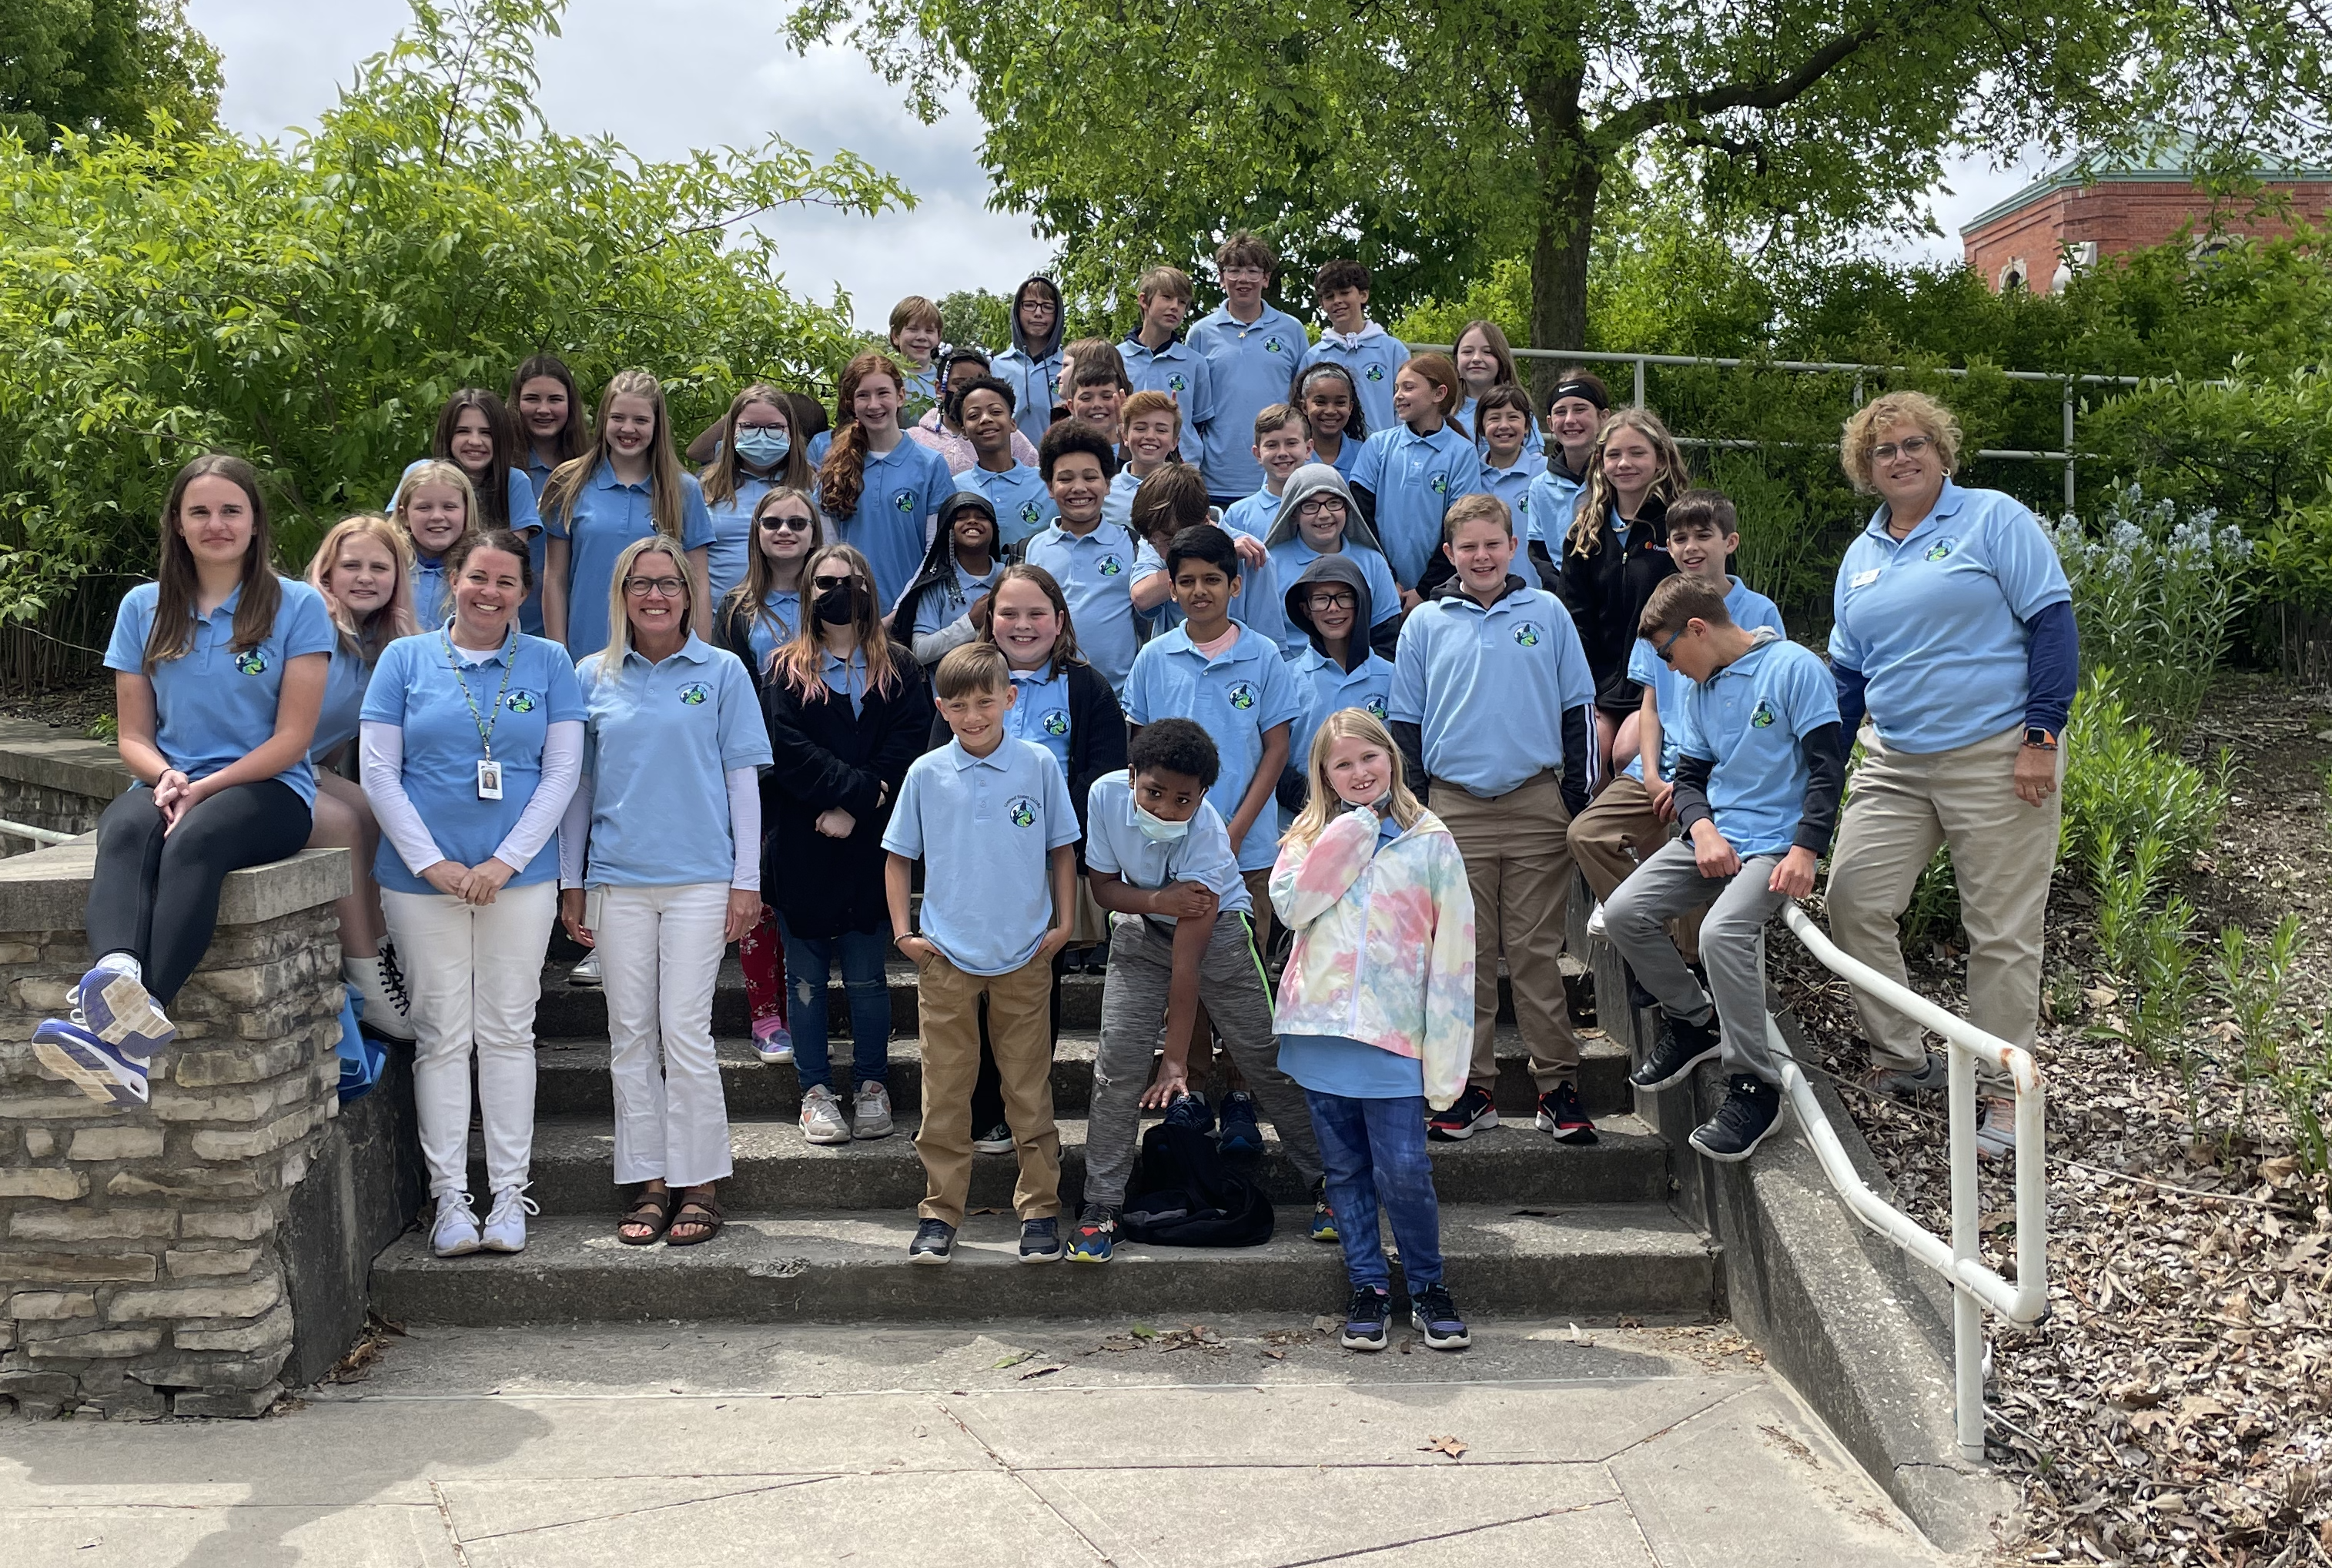 Students and teachers at the 2022 SRS at the Toledo Zoo in OH